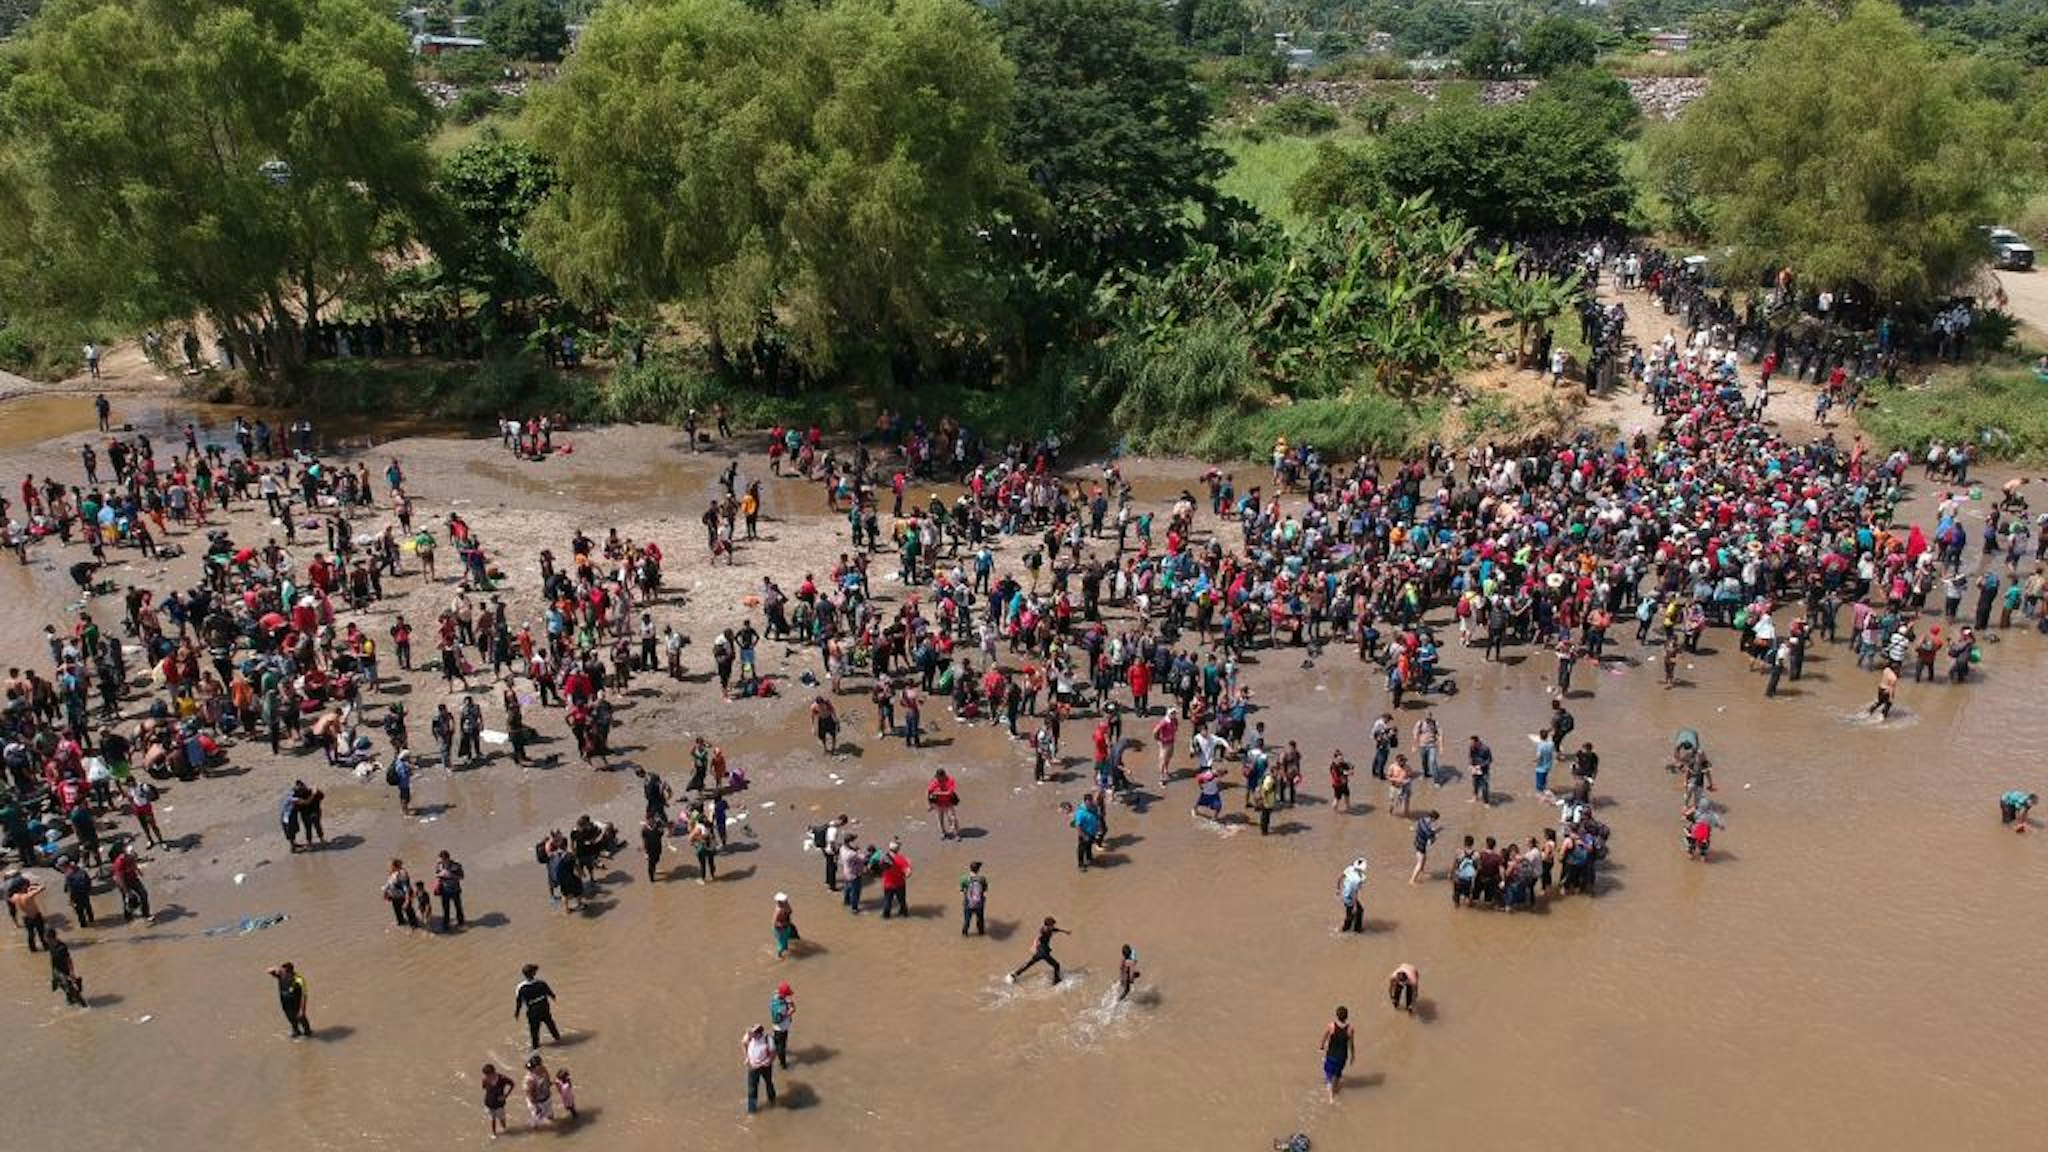 TOPSHOT - Aerial view showing migrants reaching Mexico after crossing the Suchiate River from Tecun Uman in Guatemala to Ciudad Hidalgo in Mexico on October 29, 2018, a day after a security fence on the international bridge was reinforced to prevent them from passing through. - Thousands of Honduran migrants in different groups are attempting to join a larger caravan of compatriots heading towards the United States. (Photo by Carlos ALONZO / AFP) (Photo credit should read